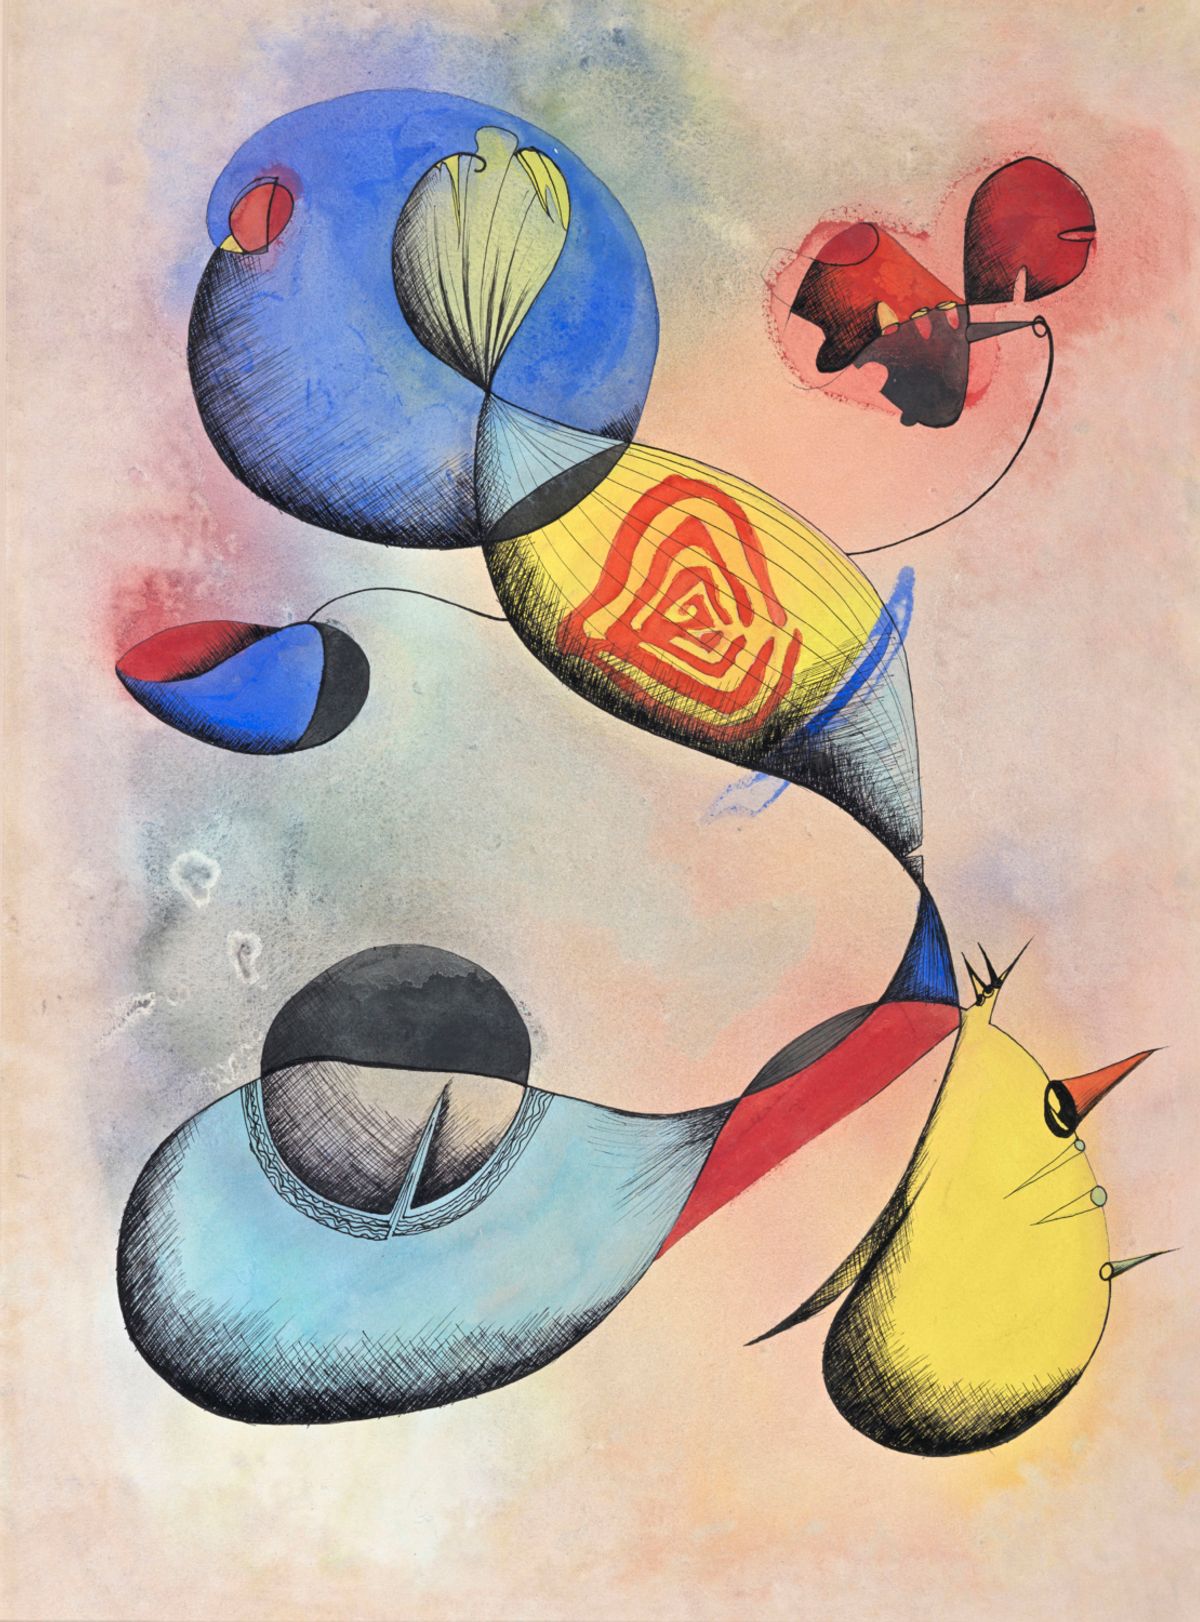 Ithell Colquhoun's Toy (1947) Courtesy Tate Archive: Transferred from the National Trust, 2019